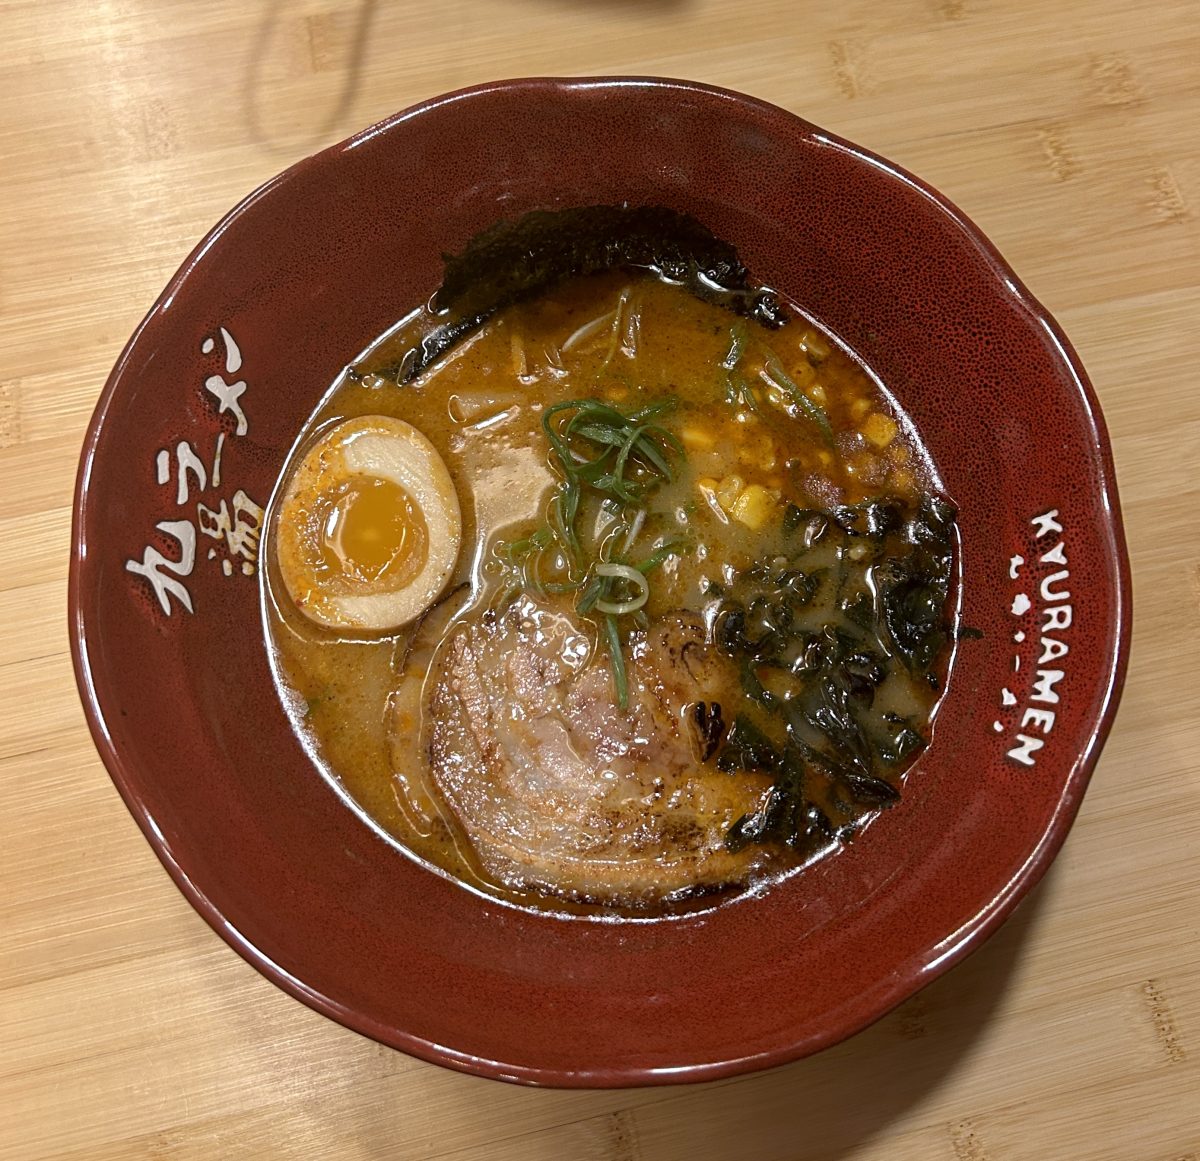 The Spicy Kyushu Tonkotsu Ramen is a flavorful blend of soft pork, salty seaweed, bamboo shoots, nori, corn, scallions, and half a boiled egg, tied together with slightly al dente ramen noodles.